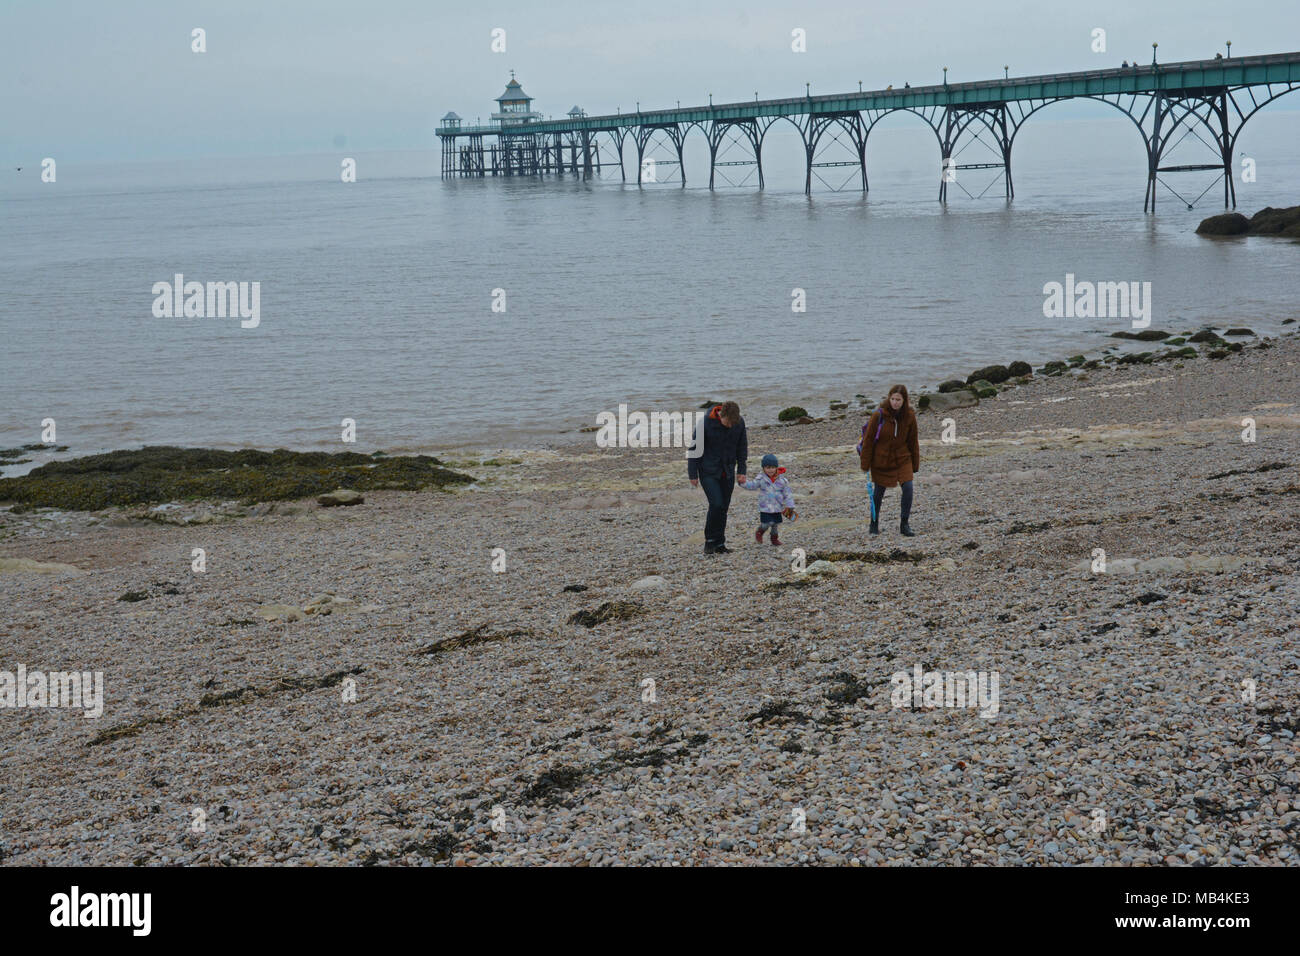 North Somerset, UK. 7th April 2018. UK Weather.WOW... On a mild April day, the beach at Clevedon sea front with the world Famous Pier in the background is FREE FROM PLASTIC general litter and rubbish. Robert Timoney/Alamy/Live/News Stock Photo